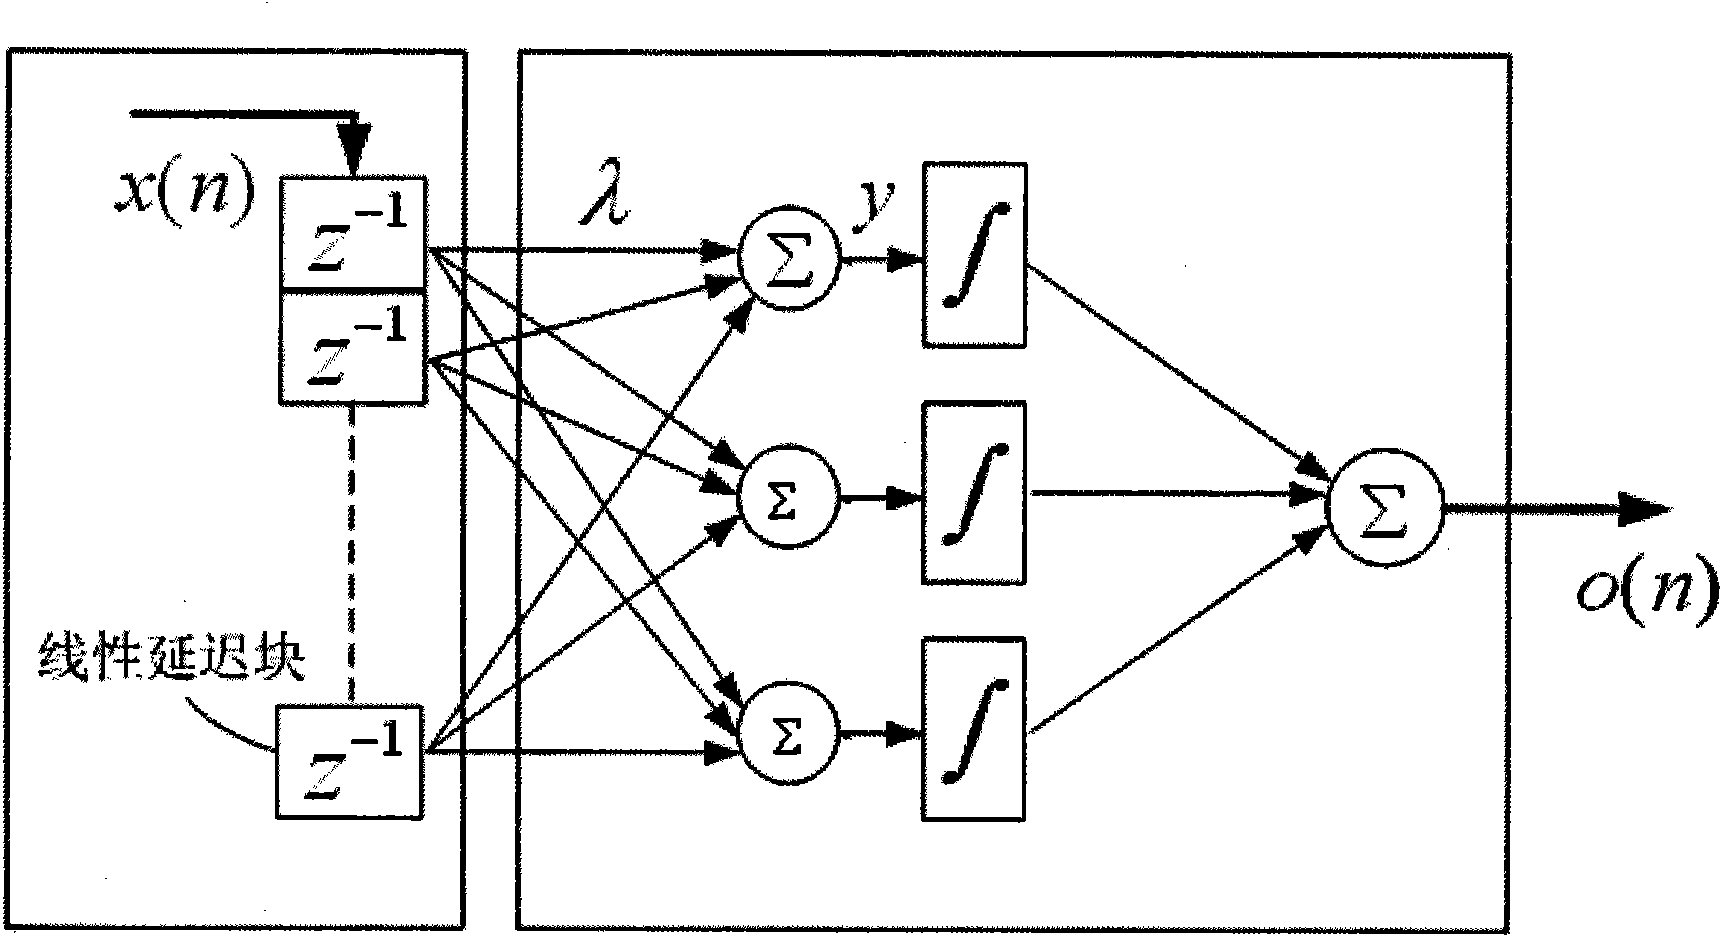 Speaker recognition method based on Gaussian mixture model embedded with time delay neural network